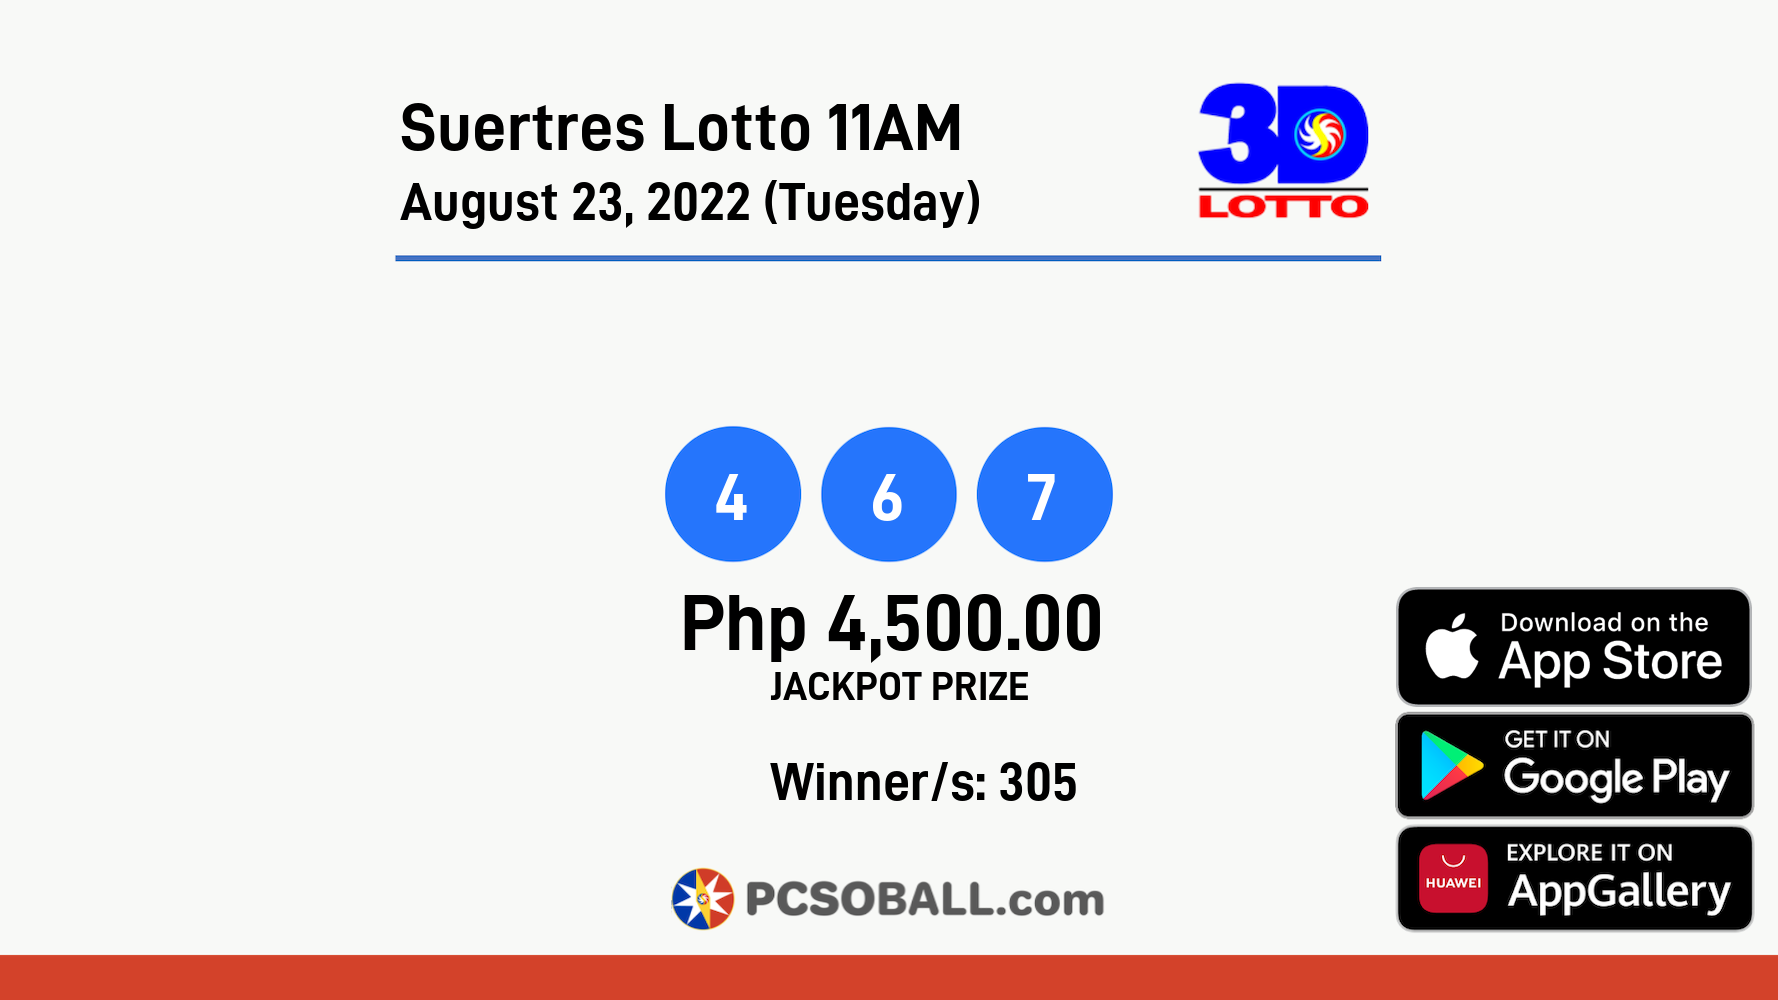 Suertres Lotto 11AM August 23, 2022 (Tuesday) Result